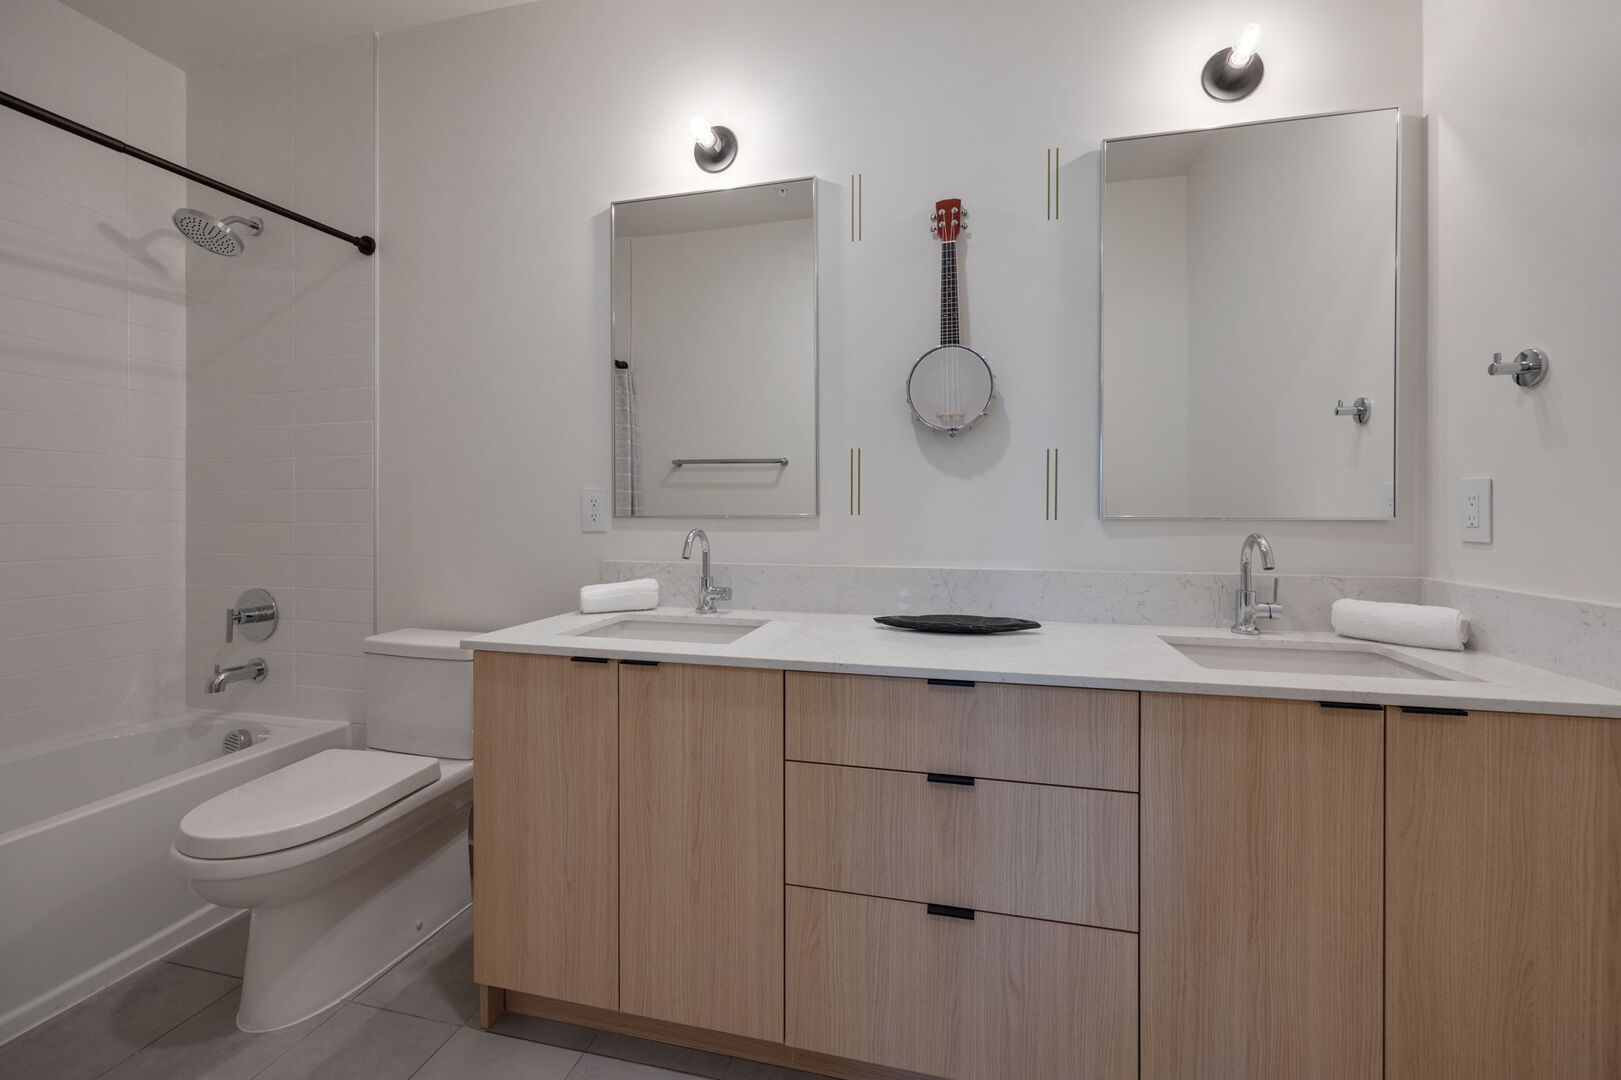 Primary Bathroom (Primary Bedroom en-suite) with dual vanity and shower/tub combo.